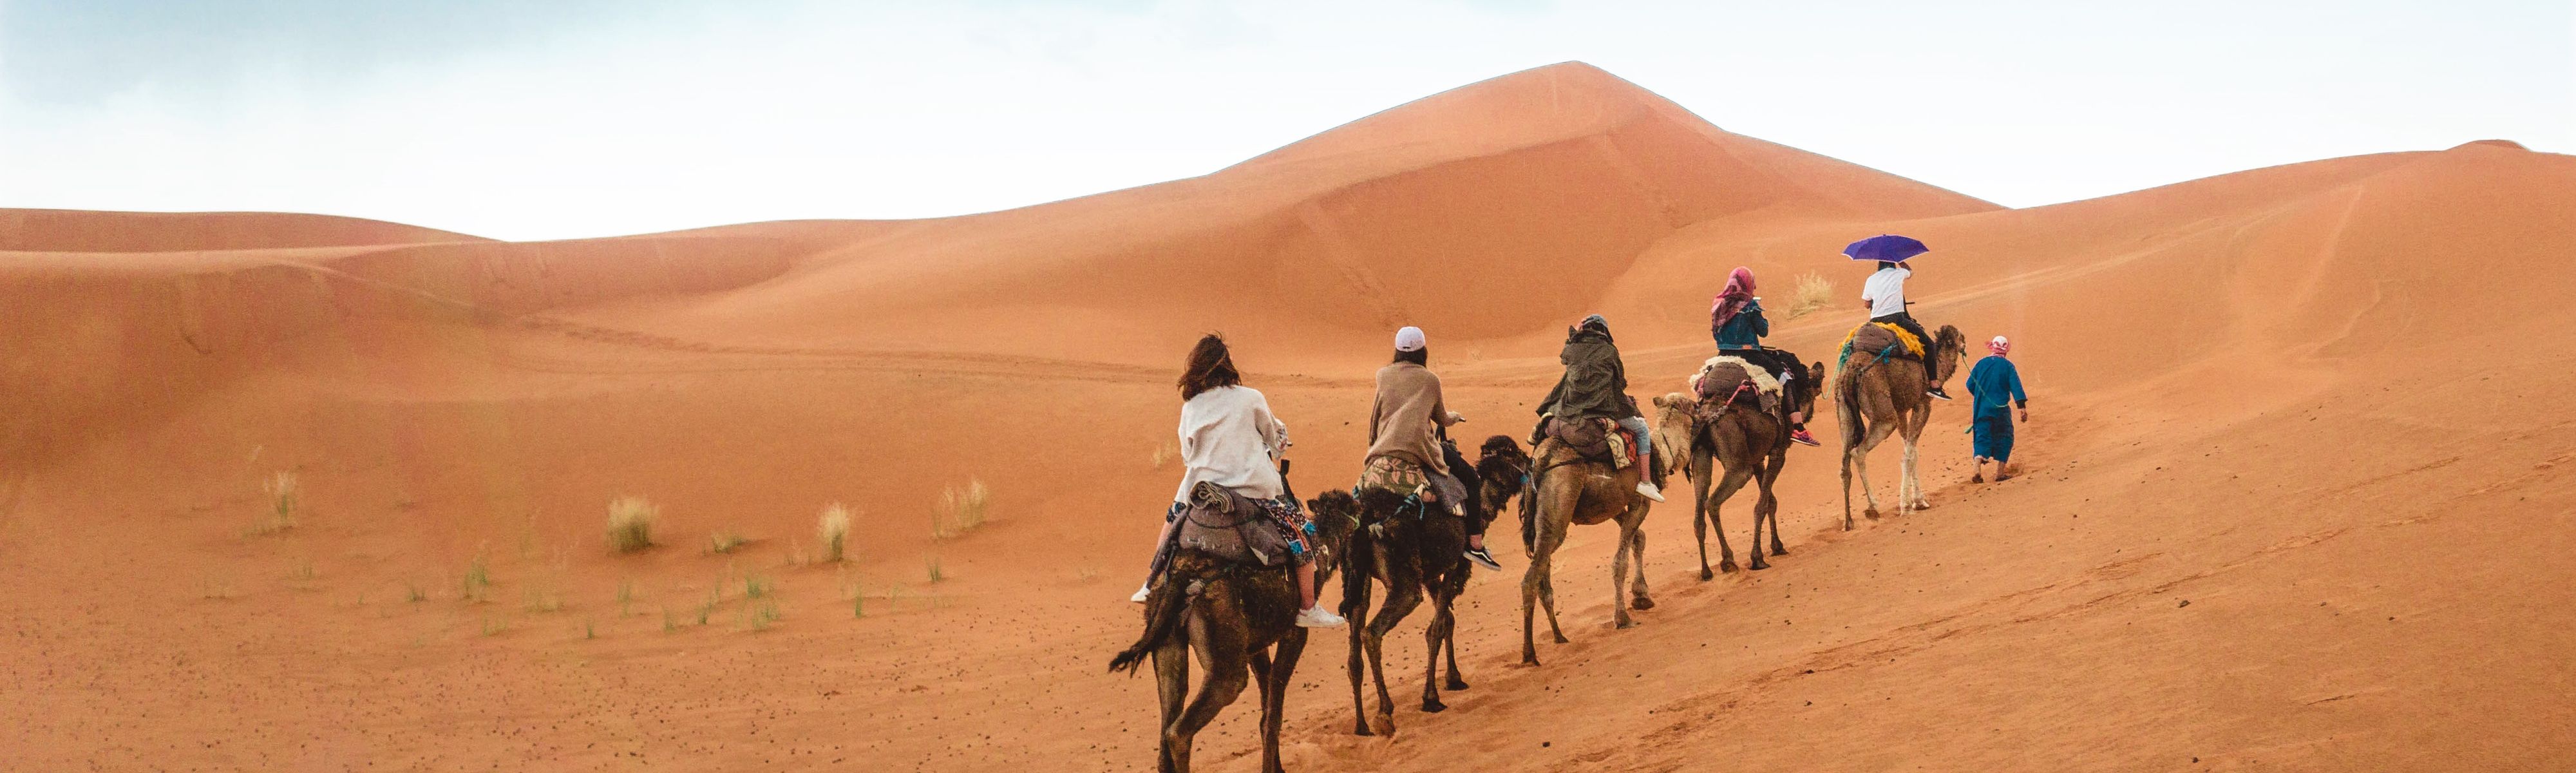 people riding camels through the sahara desert in morocco